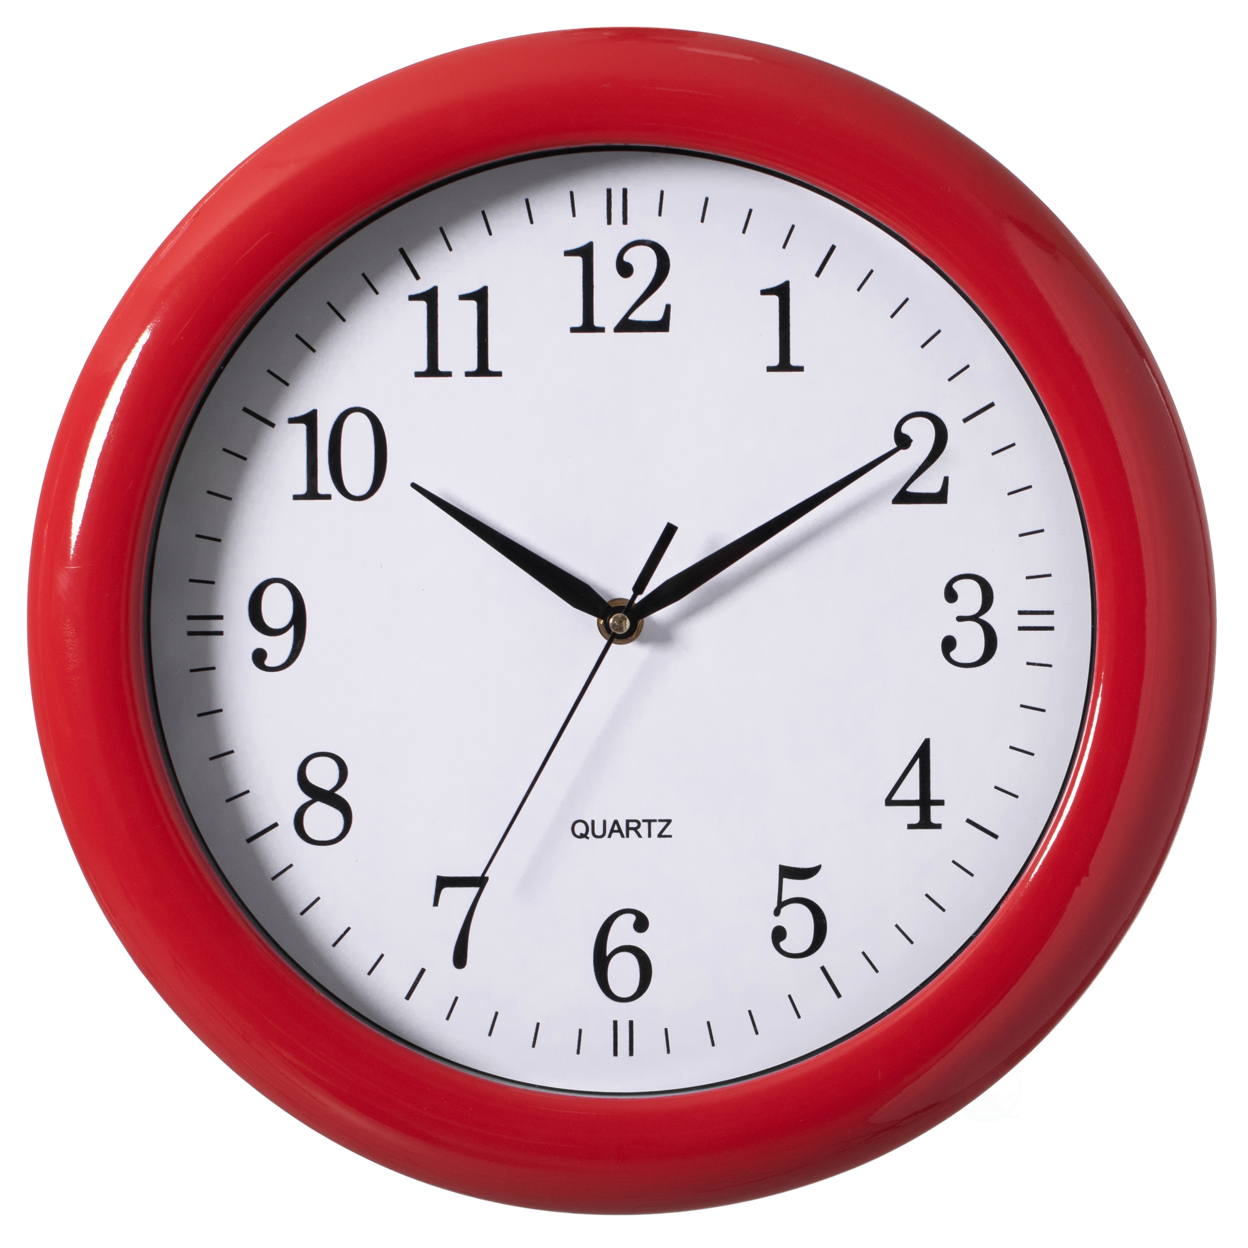 Decorative Classic Round Wall Clock For Living Room, Kitchen, Dining Room, Plastic - Red